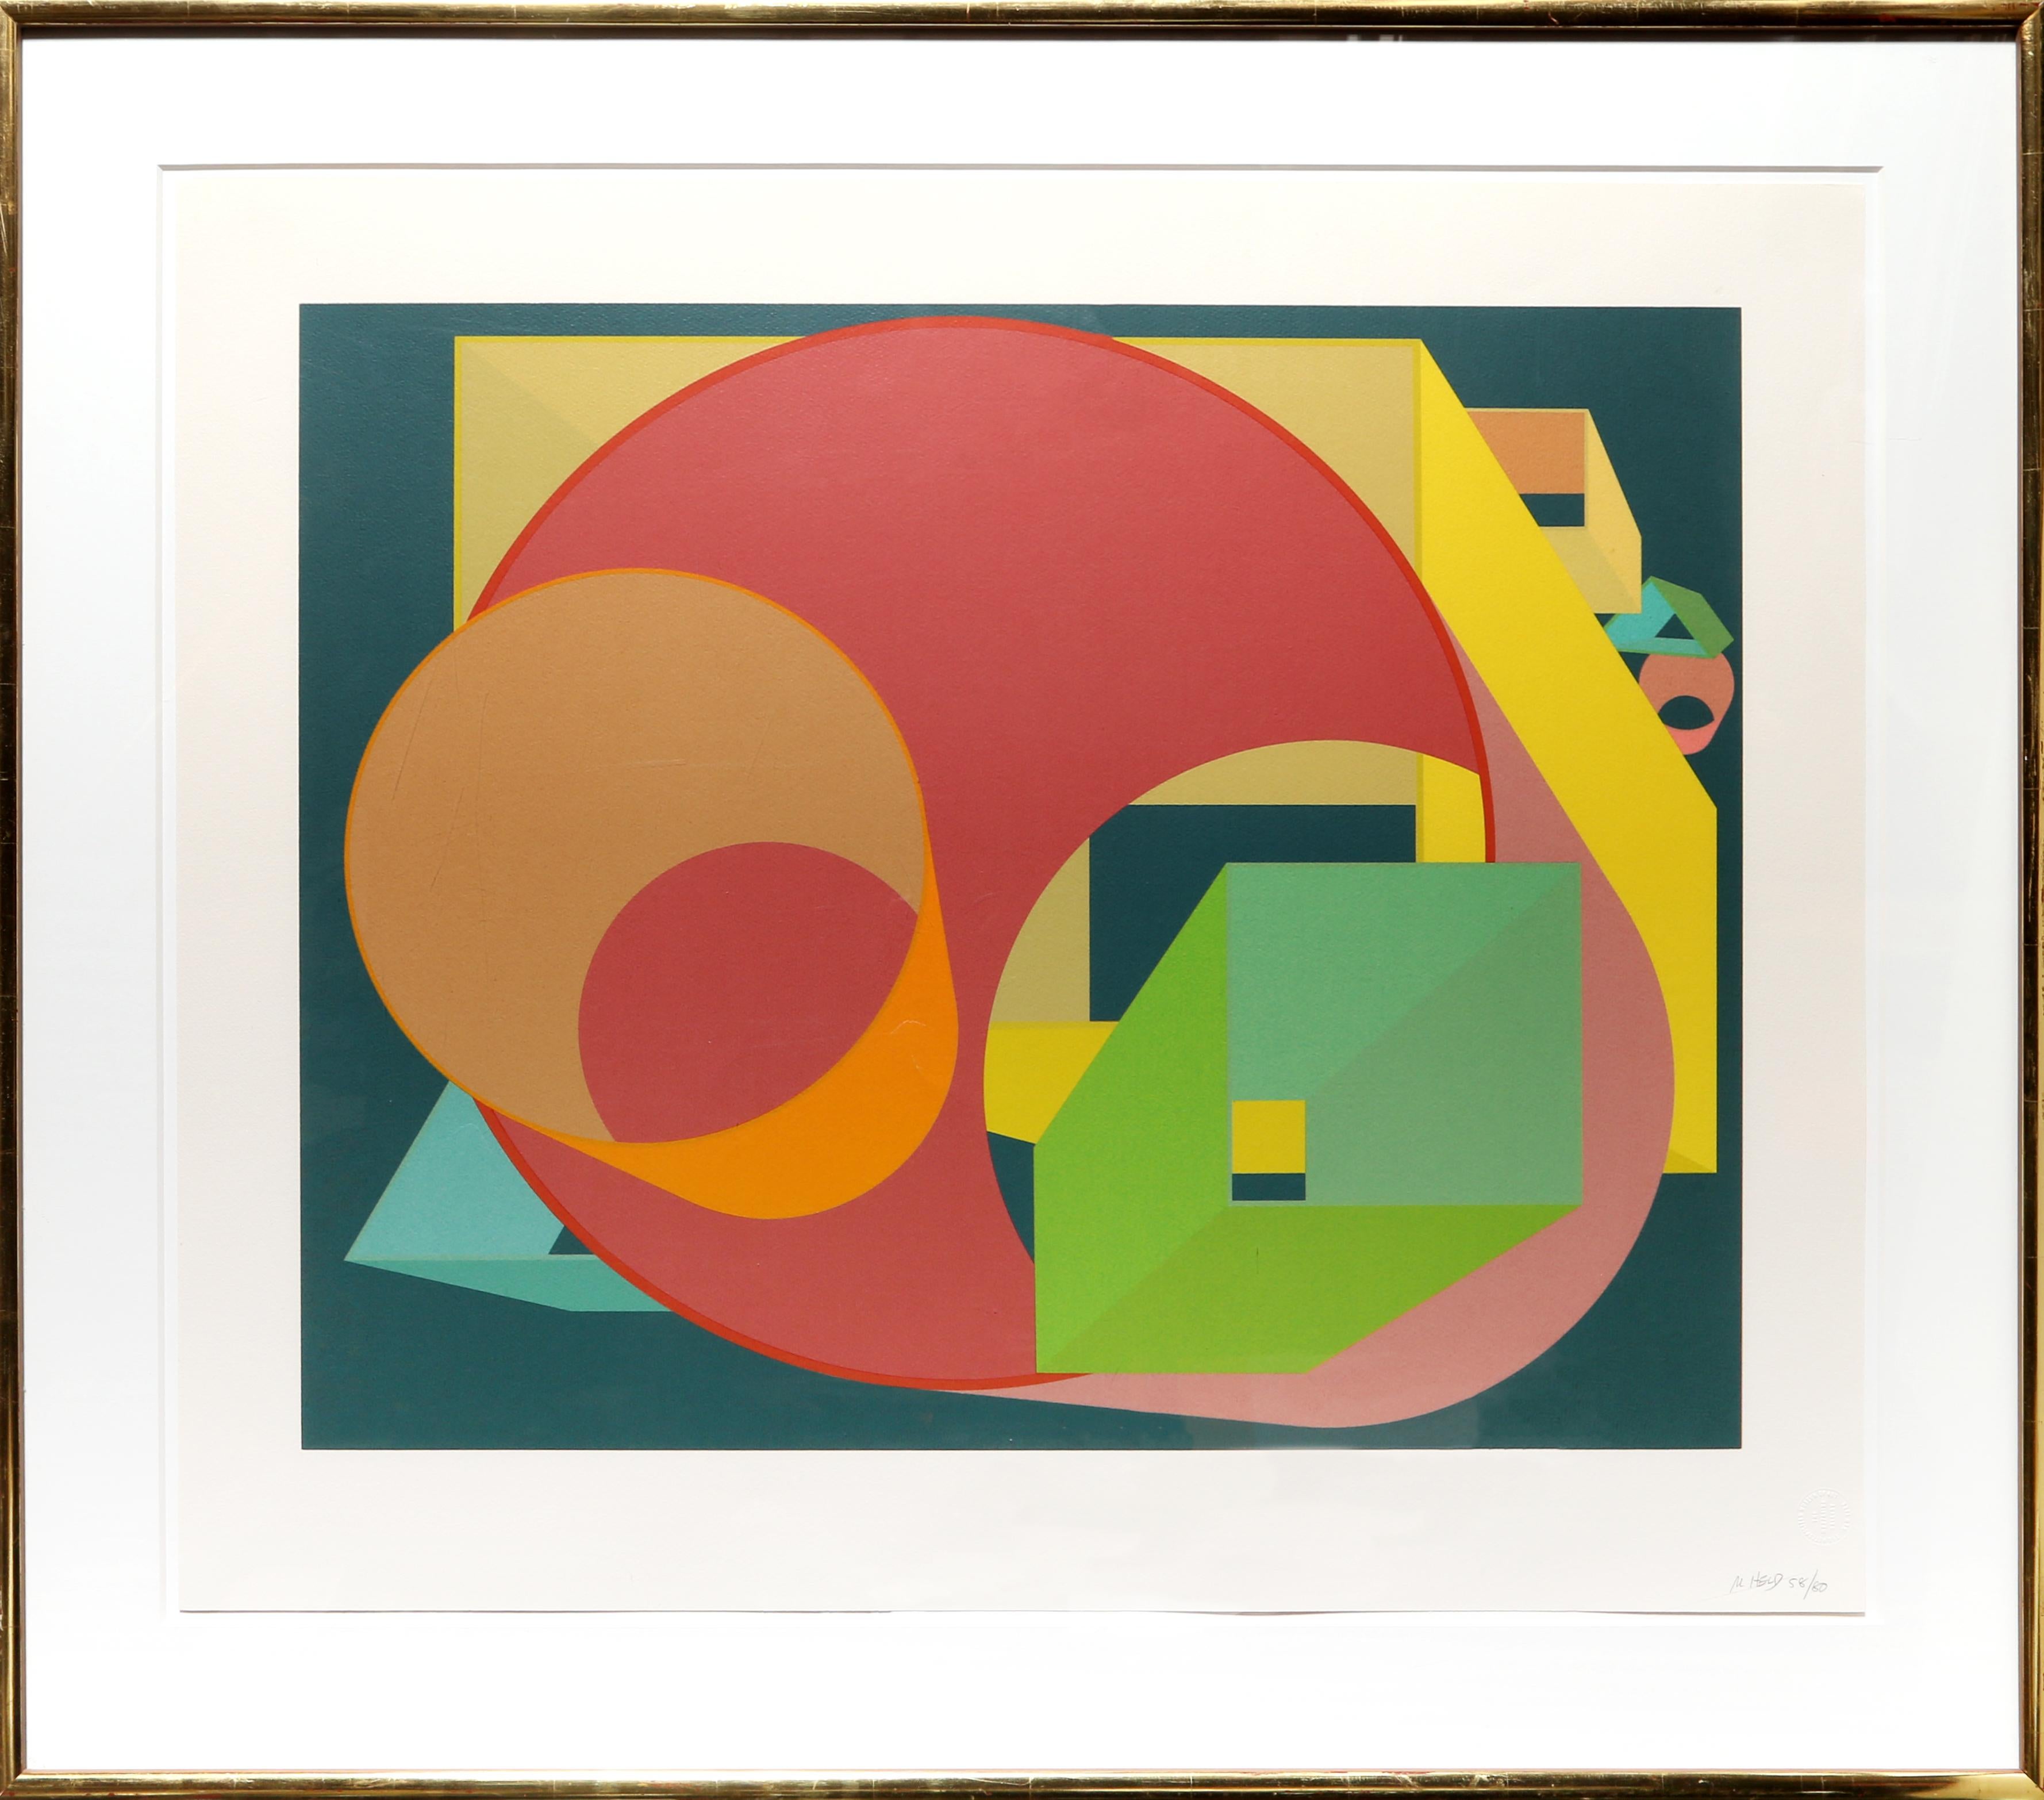 Artist: Al Held, American (1928 - 2005)
Title: Scholes I
Year: 1991
Medium: Silkscreen, signed and numbered in pencil
Edition: 80
Image Size: 23 x 29 inches
Size: 29 x 34 in. (73.66 x 86.36 cm)
Frame Size: 37 x 41.5 inches